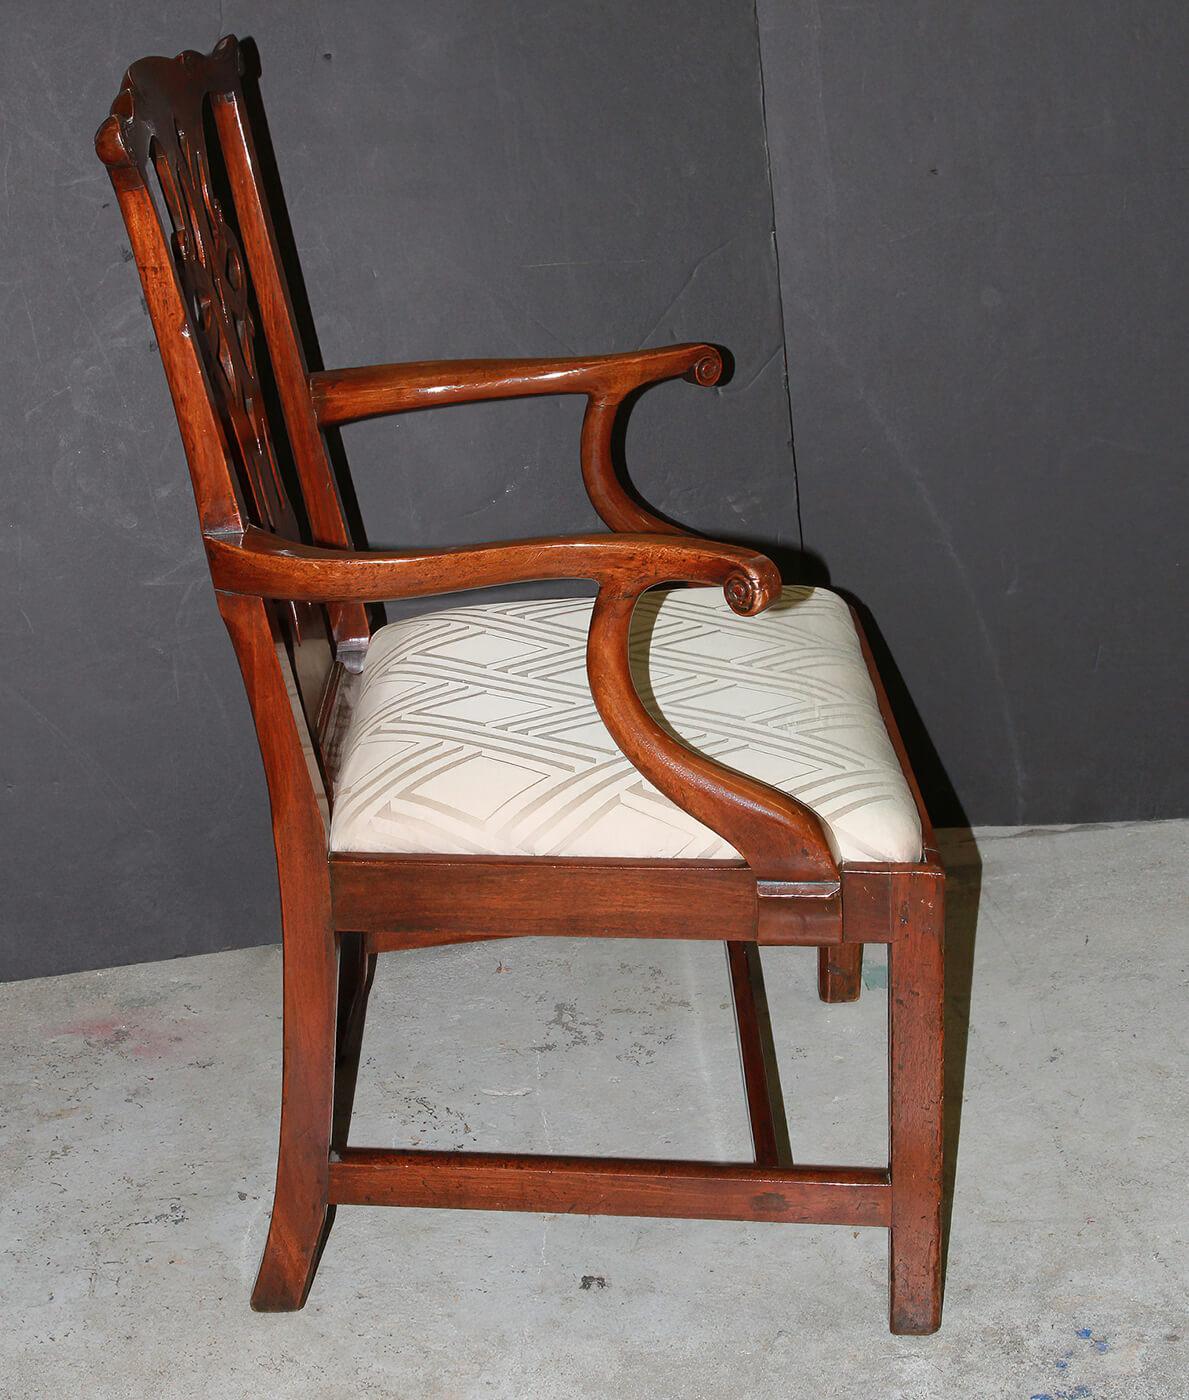 An American mahogany Chippendale armchair with scrolled carved ears, scrolled arms, a scalloped apron, and an H stretcher base.

Dimensions: 28